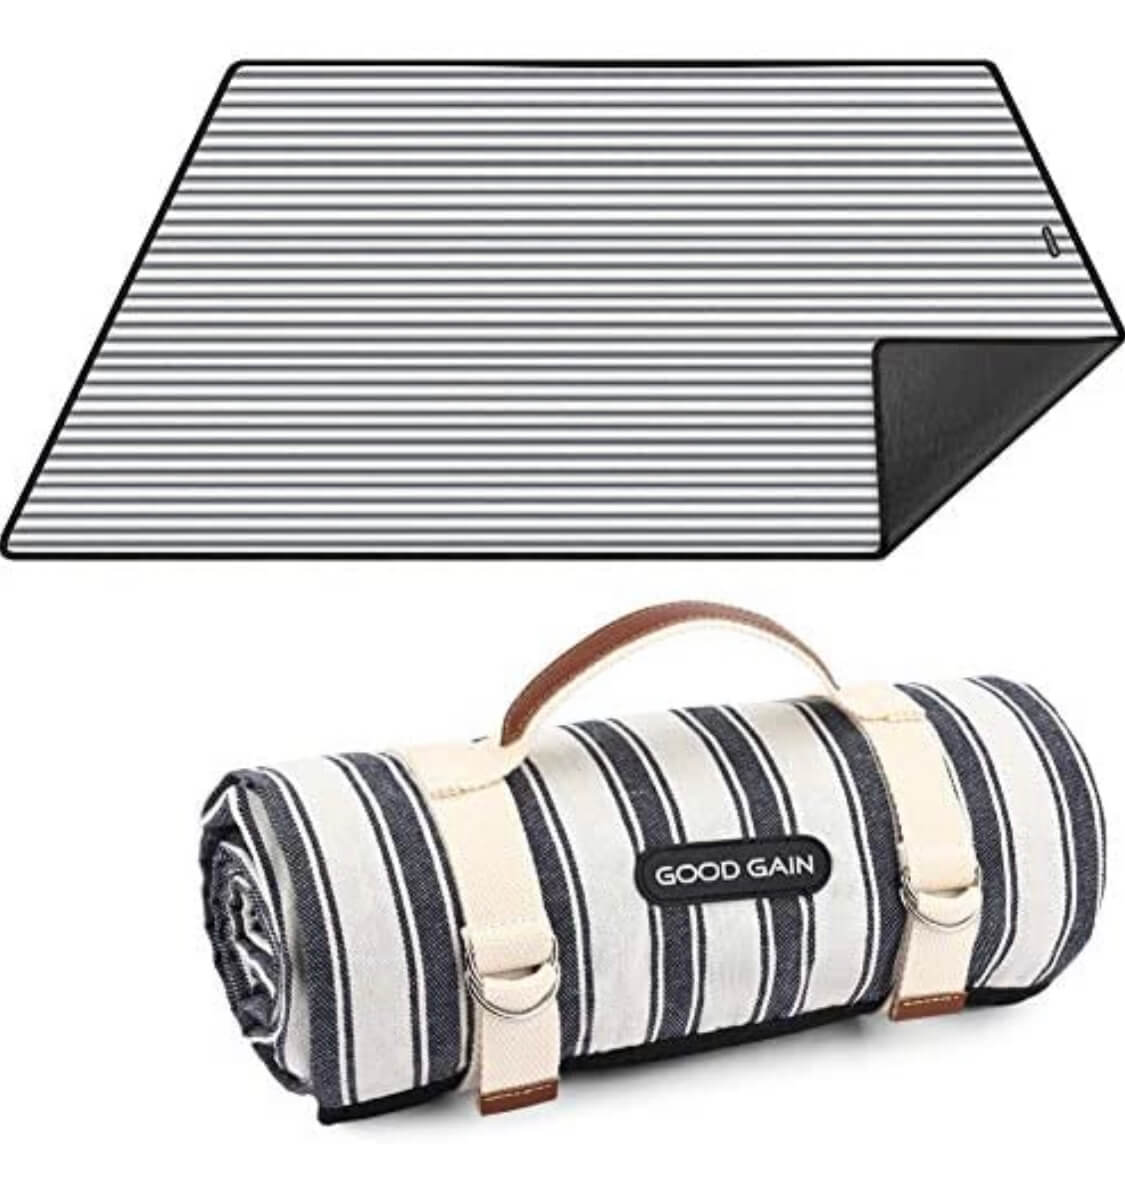 Roll up picnic blanket for the beach